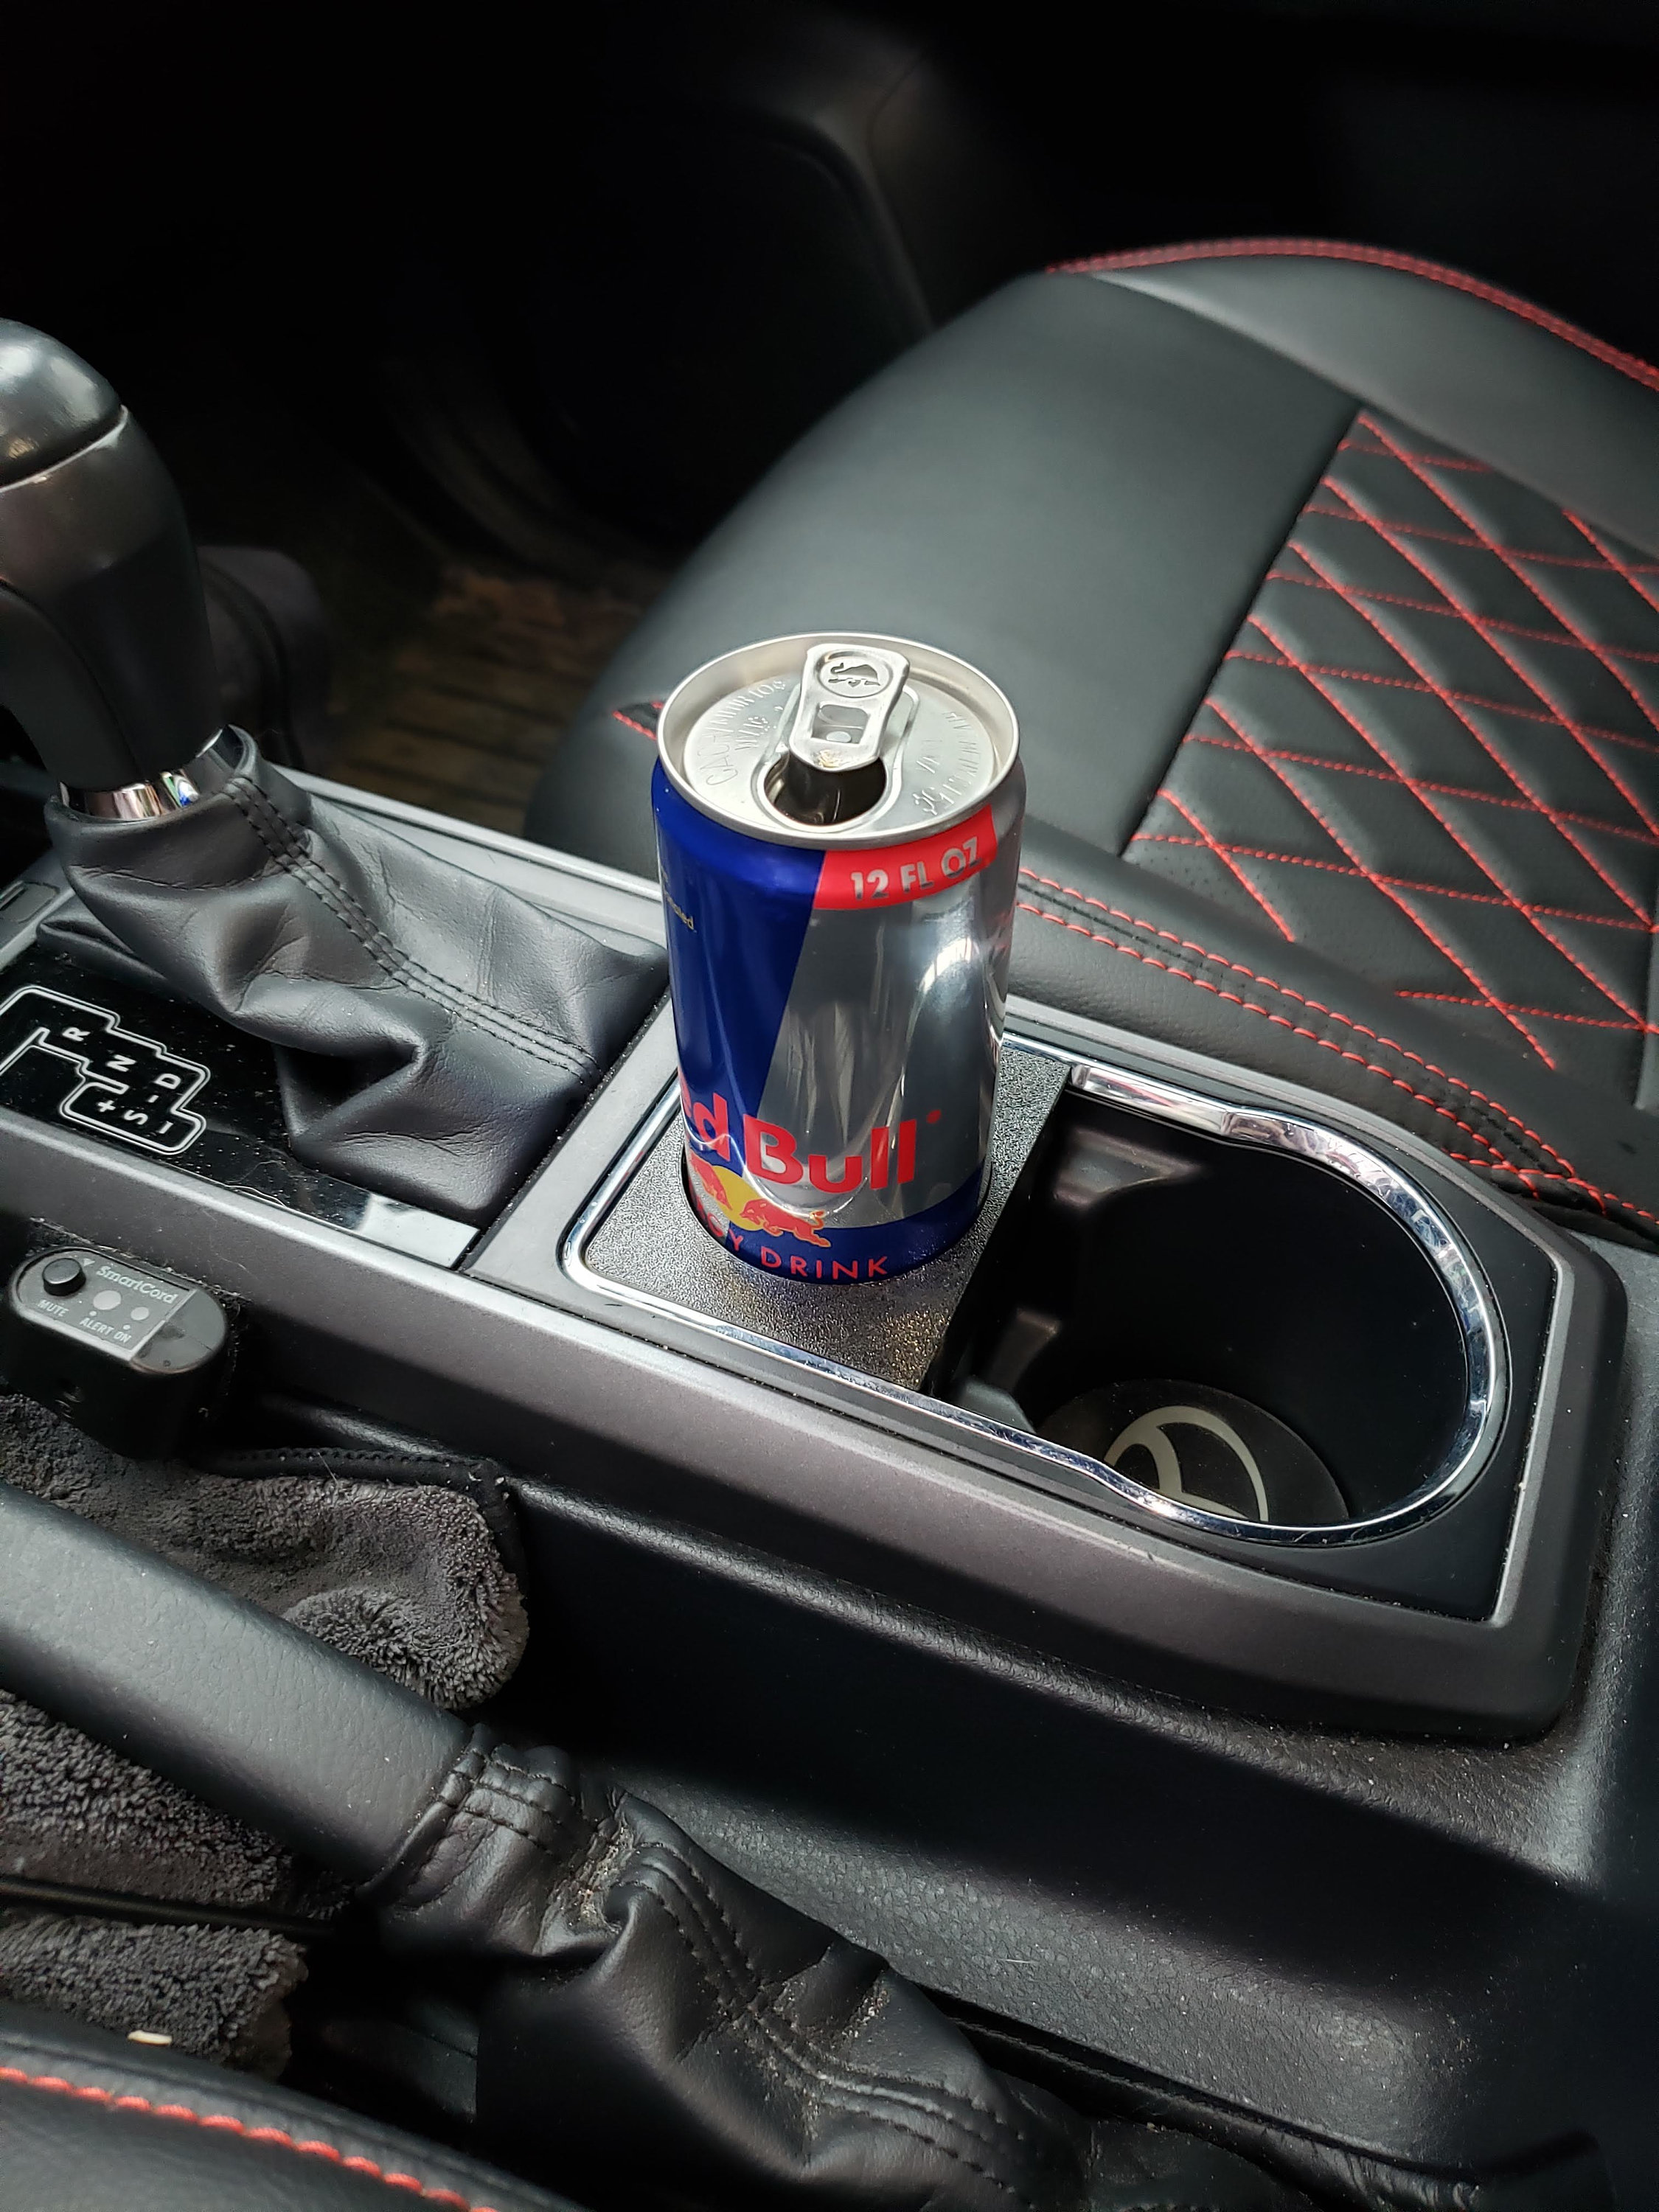 Toyota Tacoma Red Bull skinny Can Holder Cup Holder Adapter 2016 new  Improved Design 